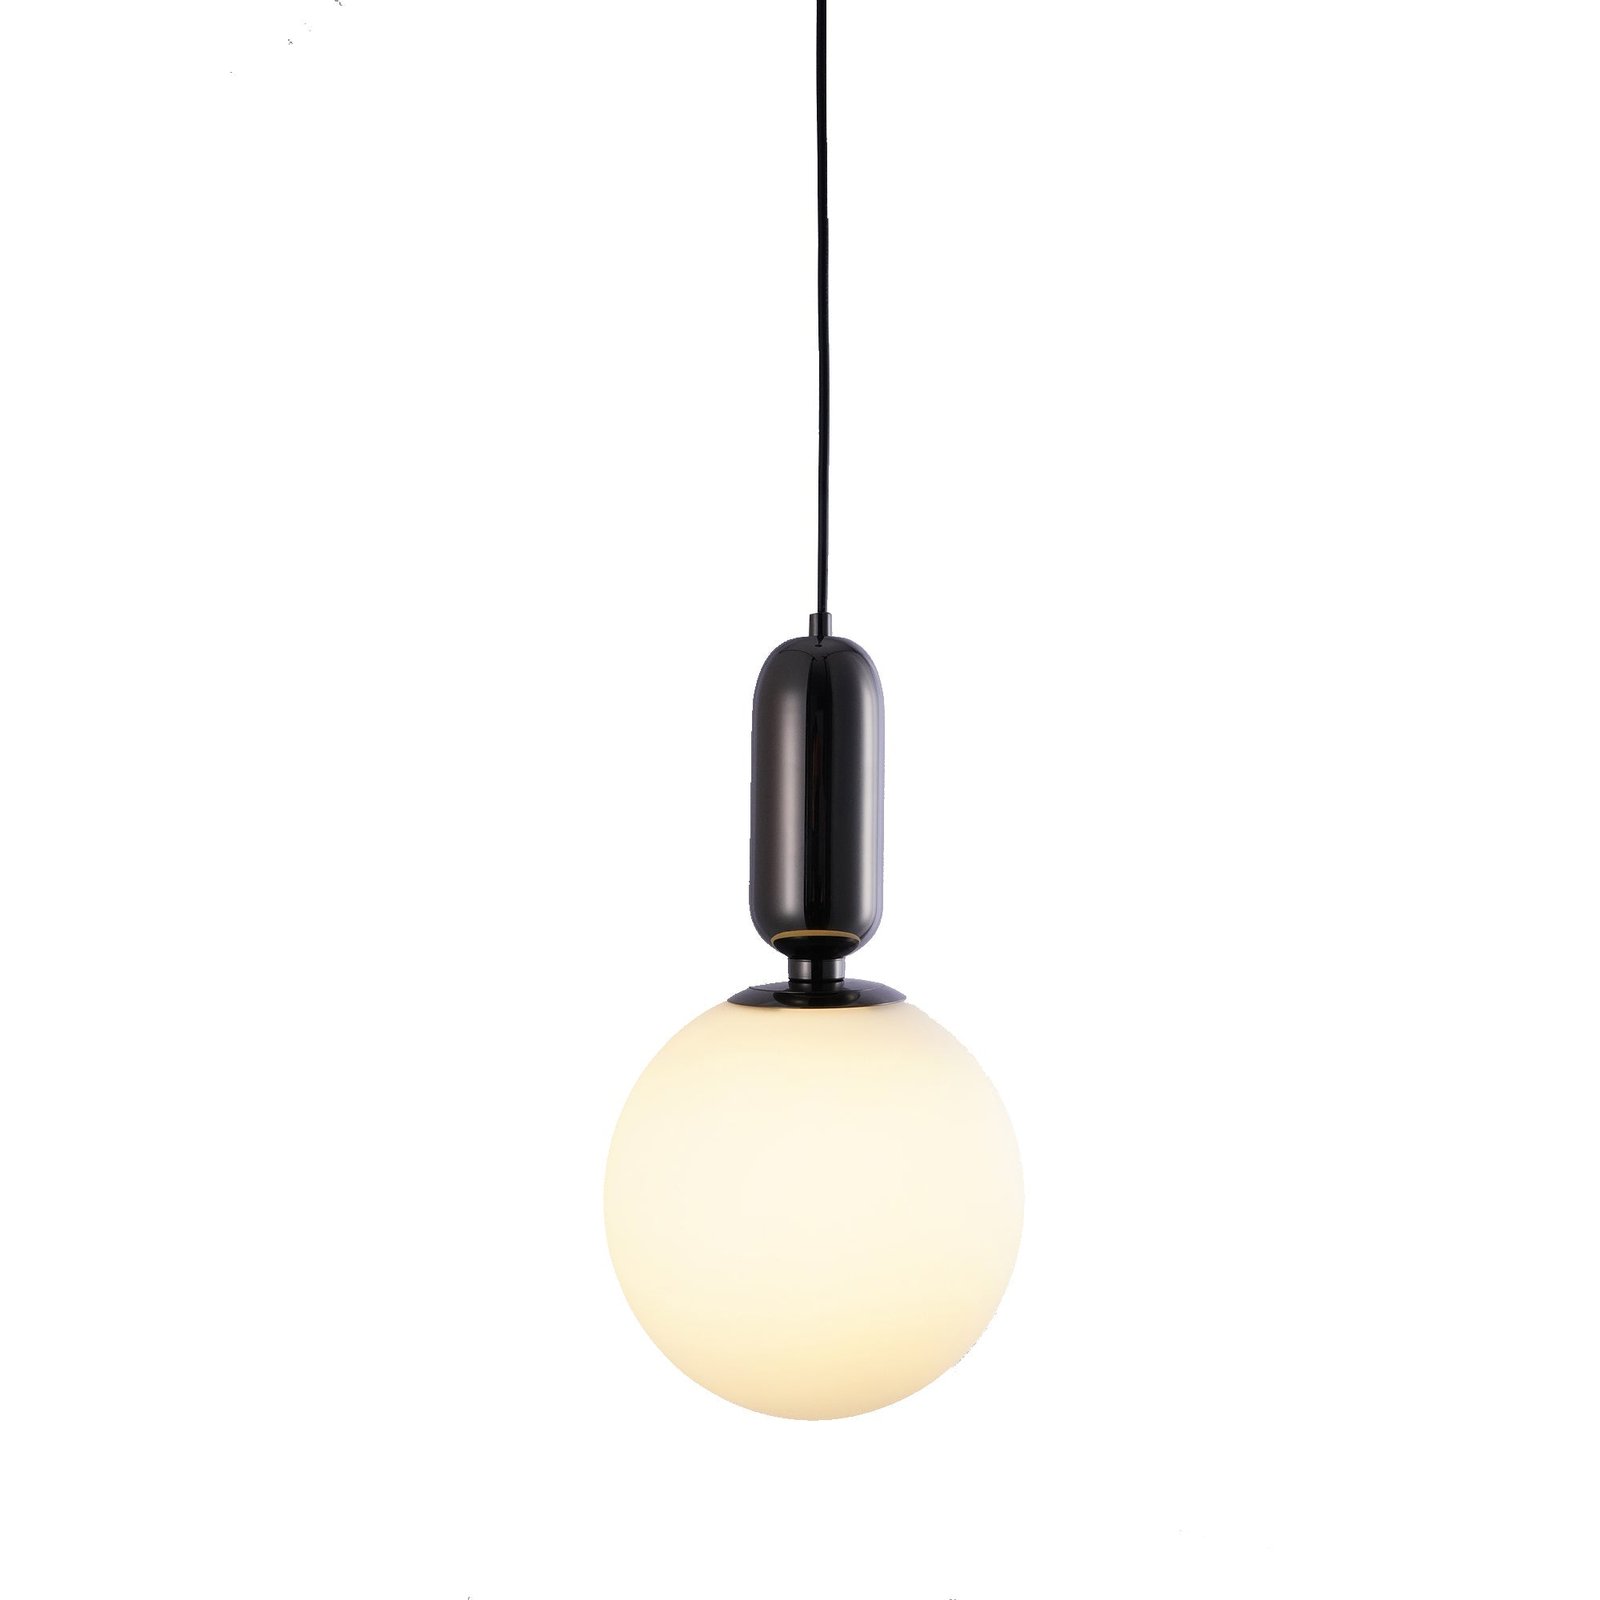 Black and white Aballs Pendant Light measuring 11.8 inches in diameter and 18.8 inches in height (30cm x 48cm)